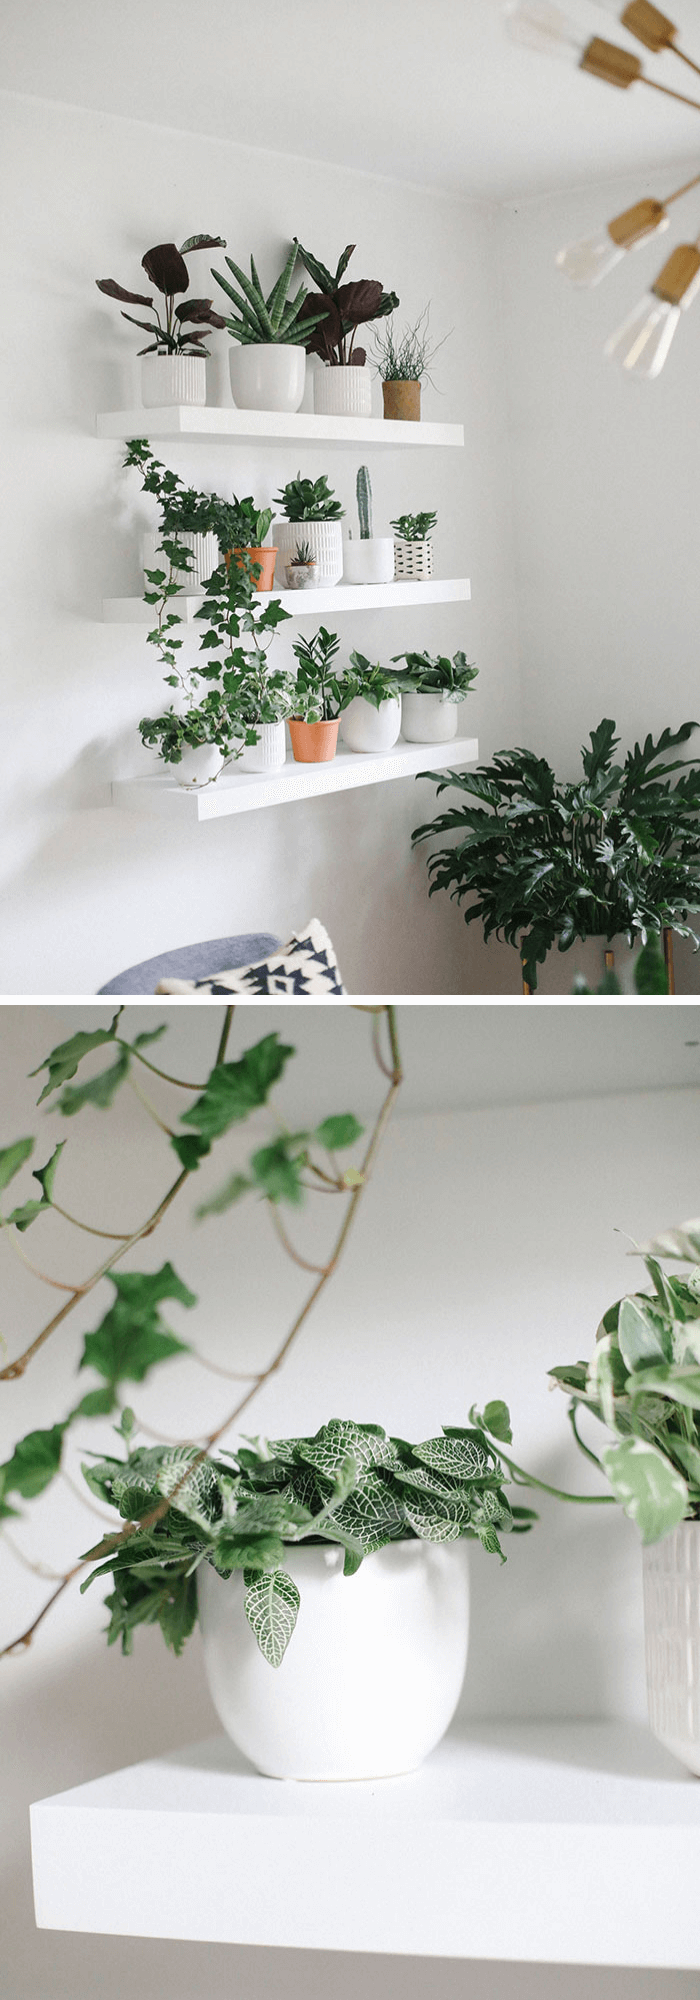 How to build an oxygen-filled plant wall